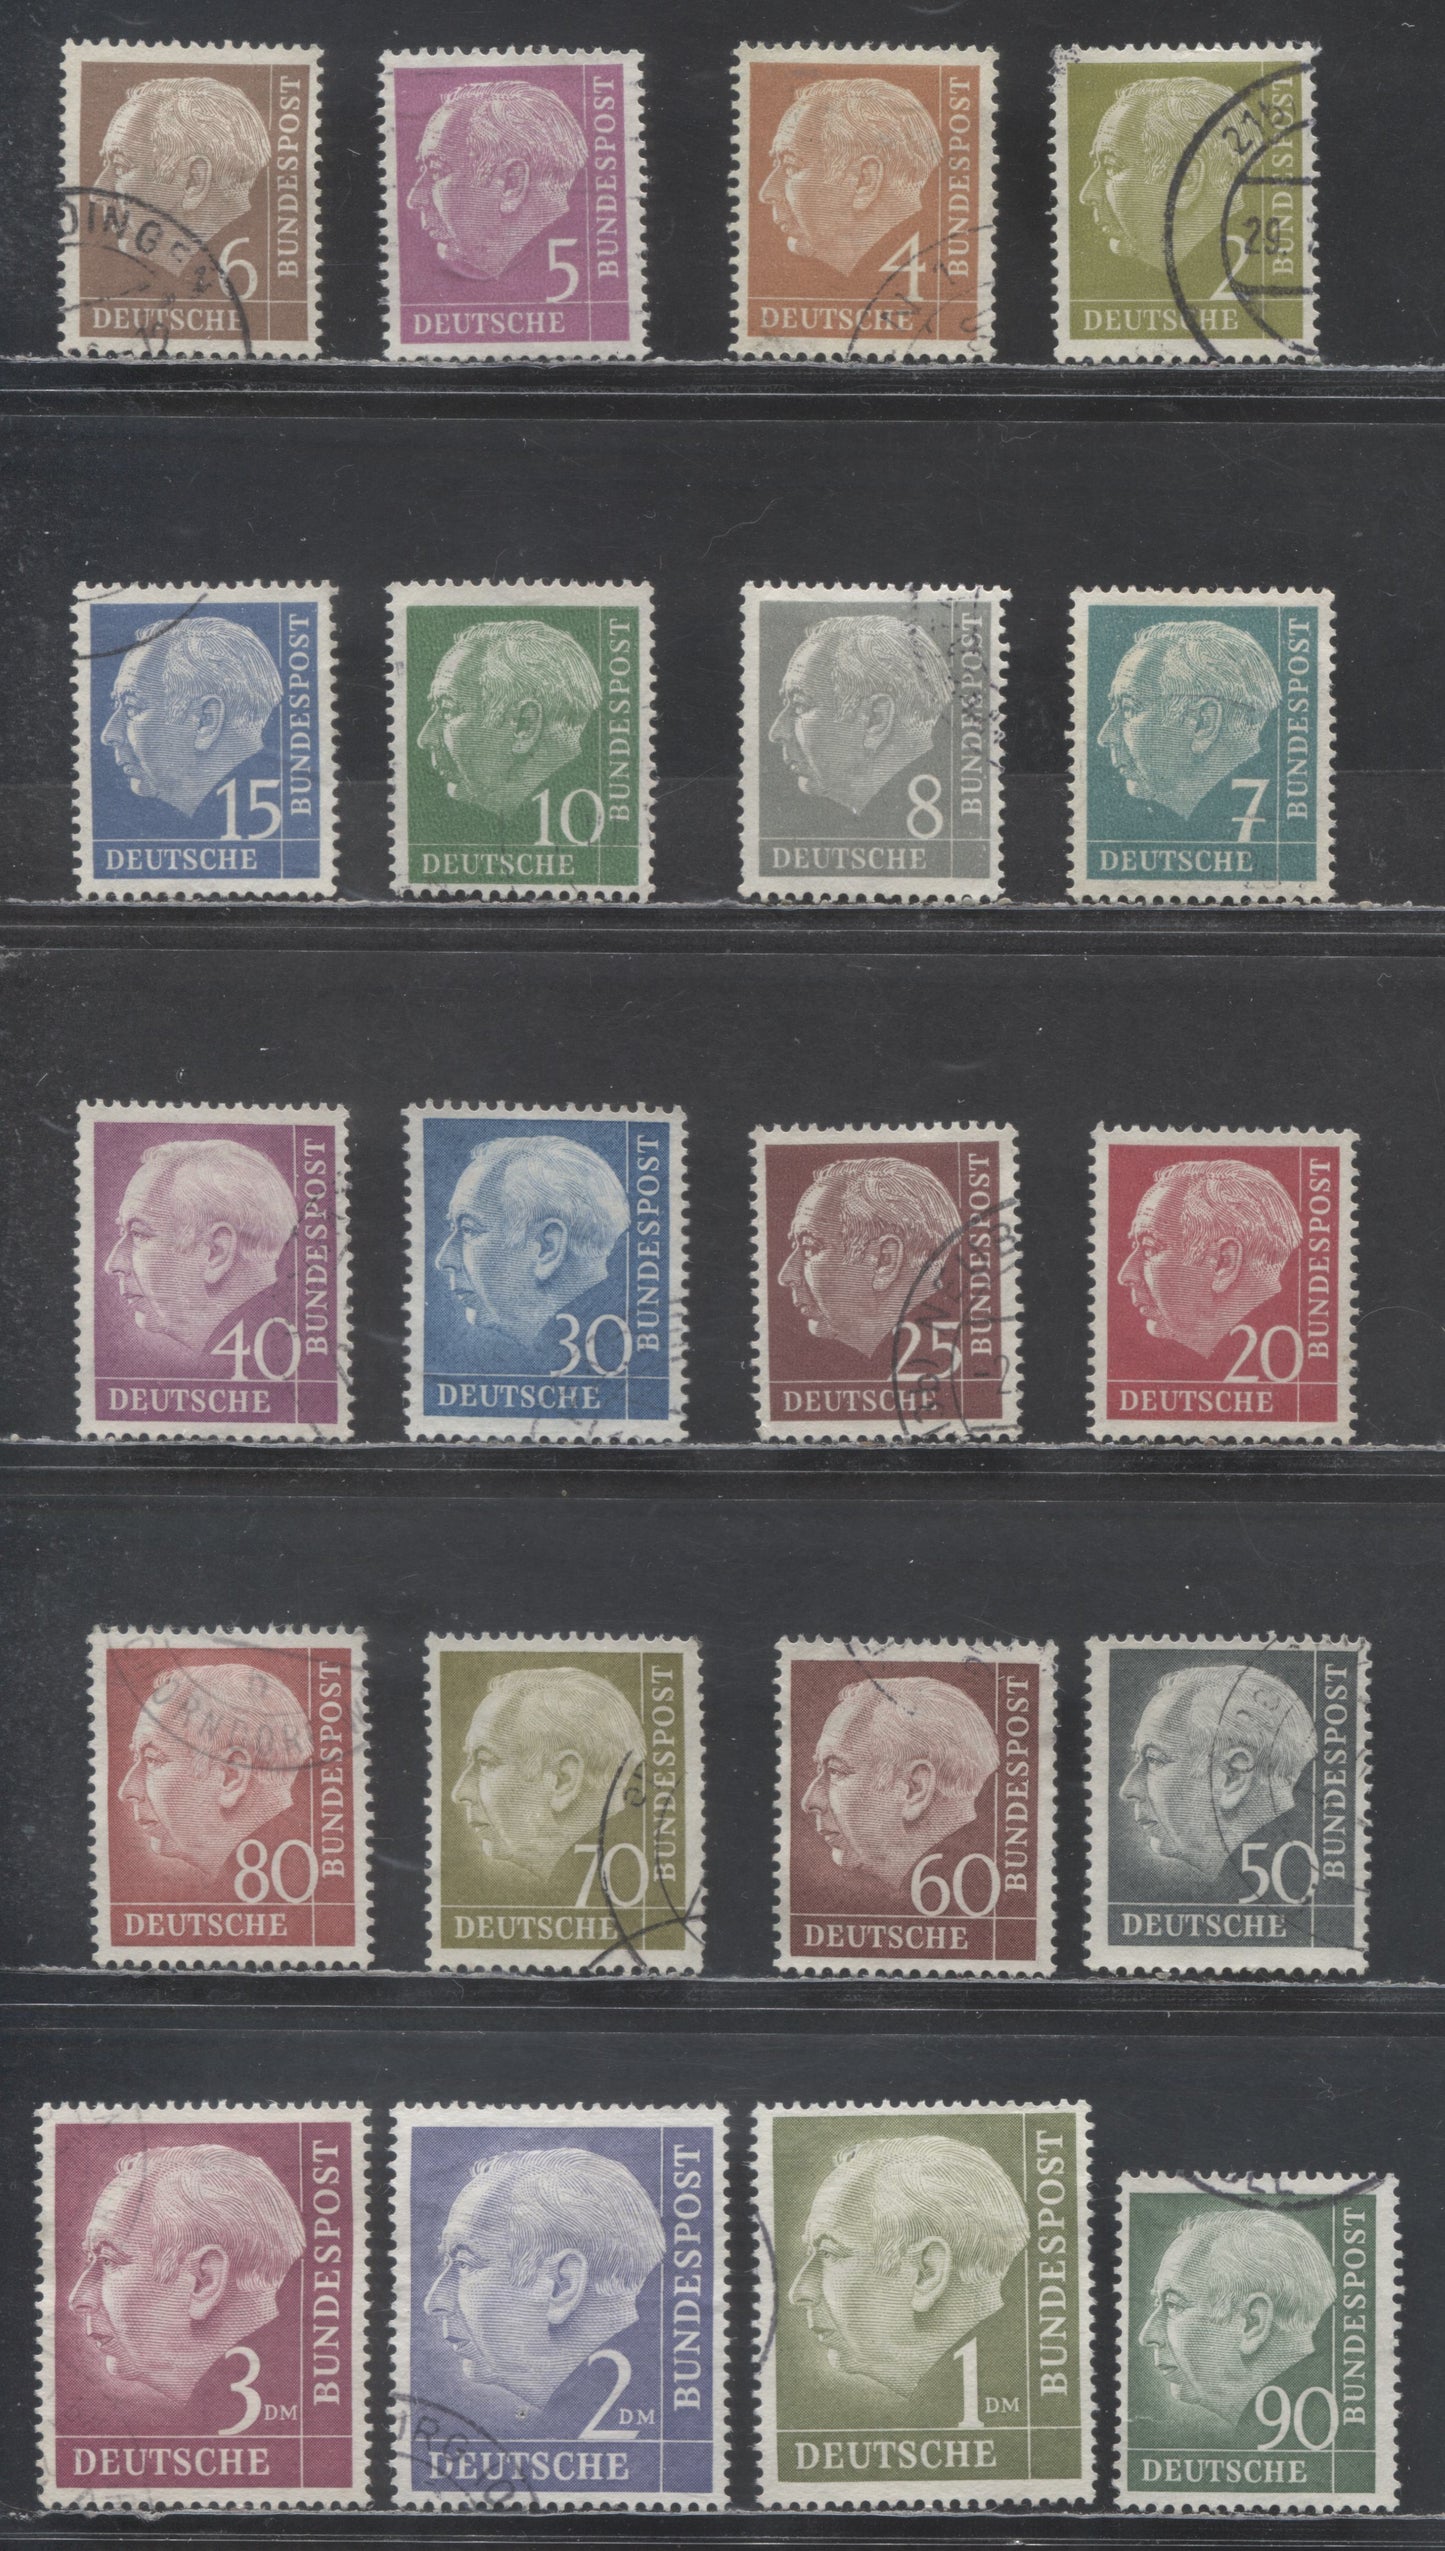 Lot 24 Germany SC#702-721 1954-1960 Theodor Heuss Definitives, 20 Very Fine Used Singles, Click on Listing to See ALL Pictures, 2022 Scott Cat. $22.35